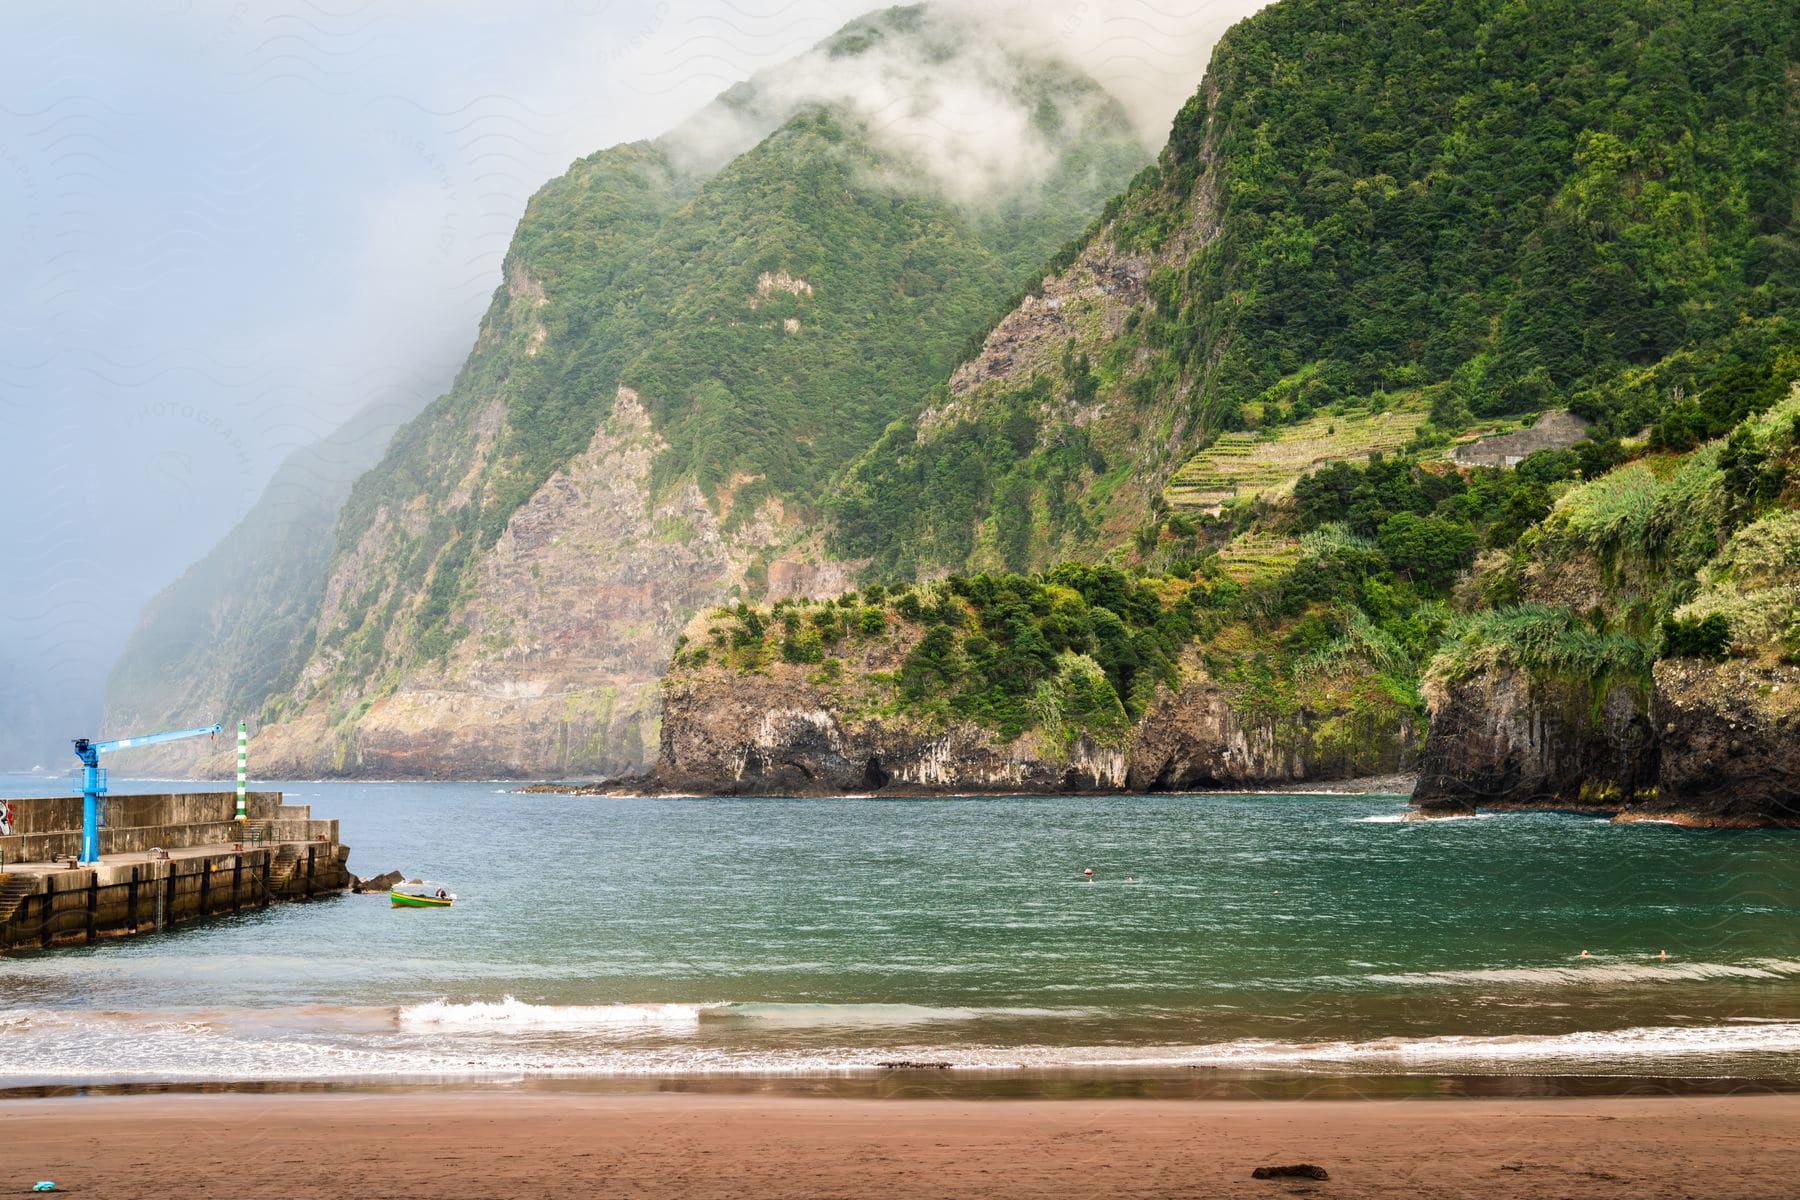 An island encircled by mountains, adorned with grassy terrain, with a boat moored near the beach during the day.